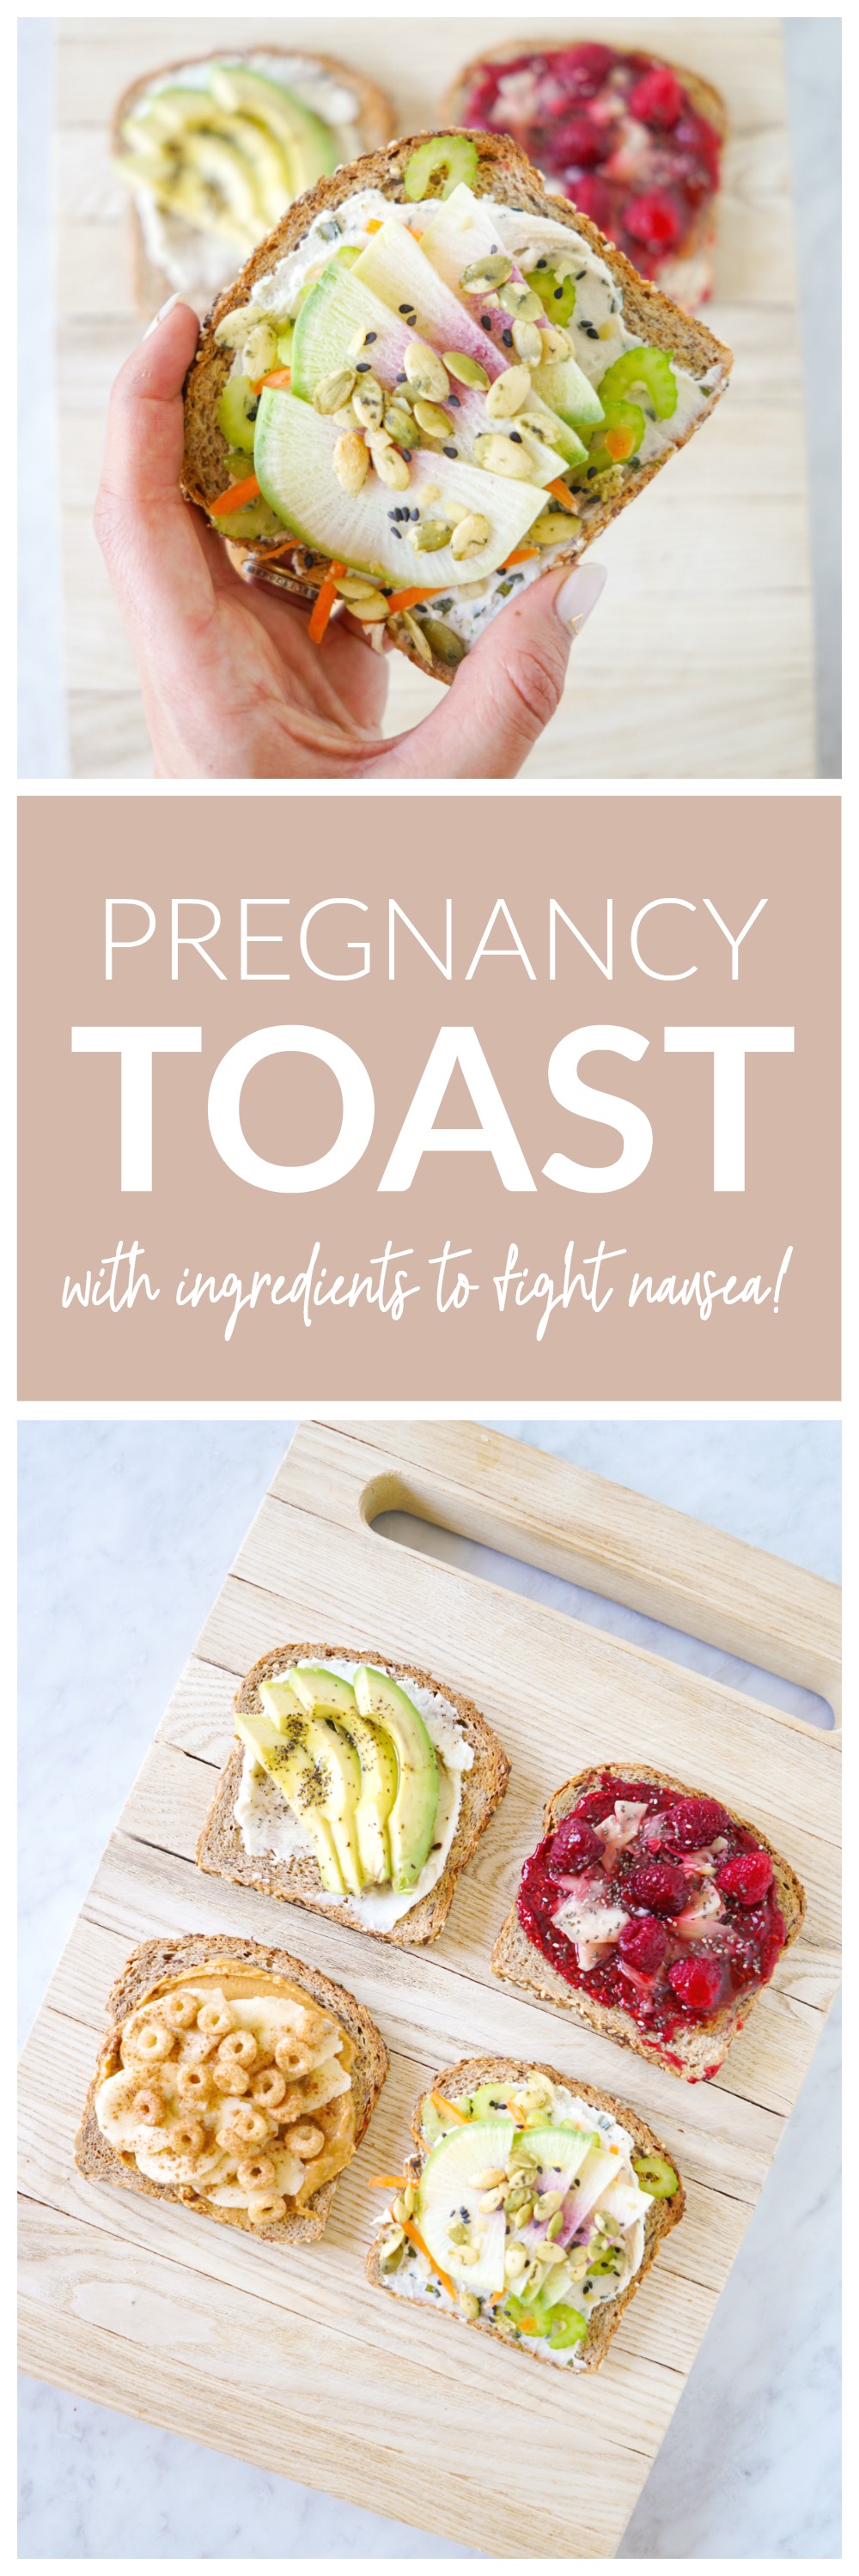 Pregnancy Toast - 4 vegan toast recipes that are perfect for pregnancy